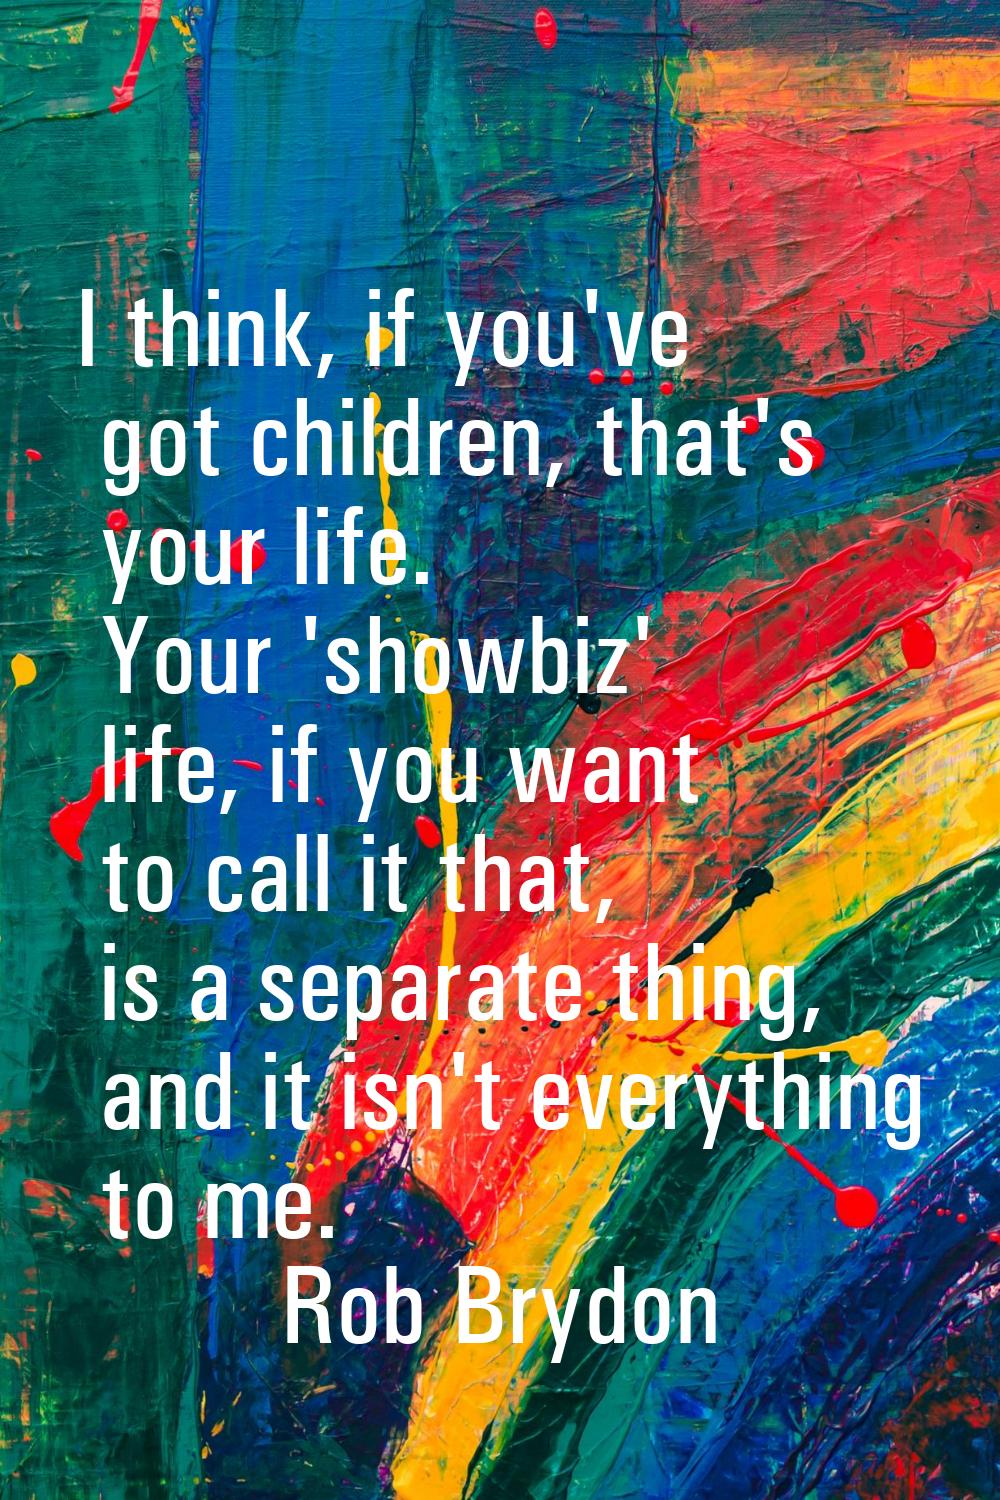 I think, if you've got children, that's your life. Your 'showbiz' life, if you want to call it that